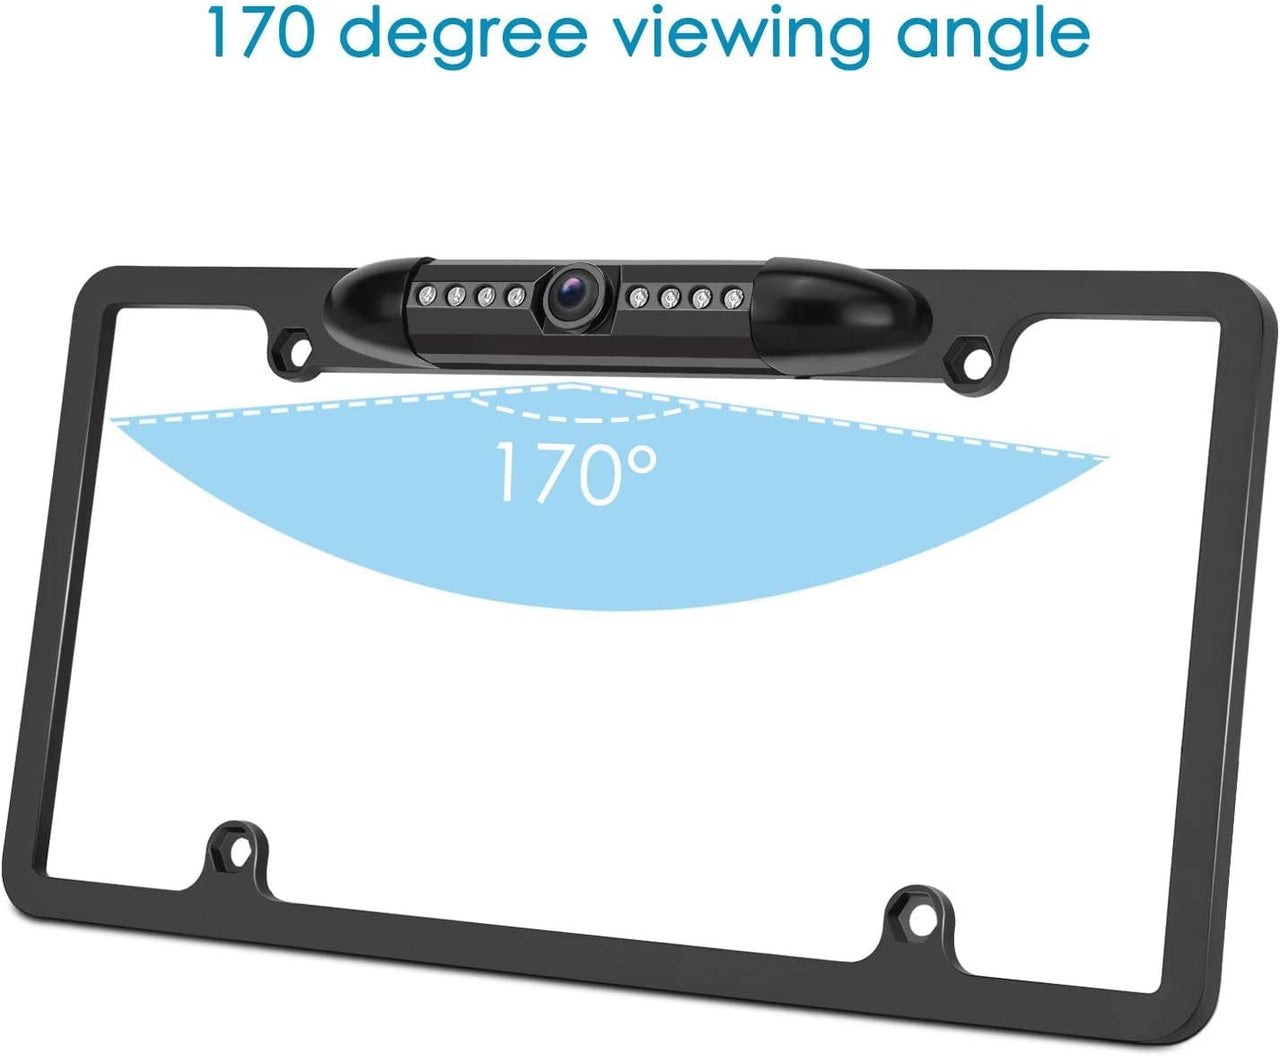 Backup Camera Rearview License Plate Frame for ALPINE ILX-W650 ILXW650 Black